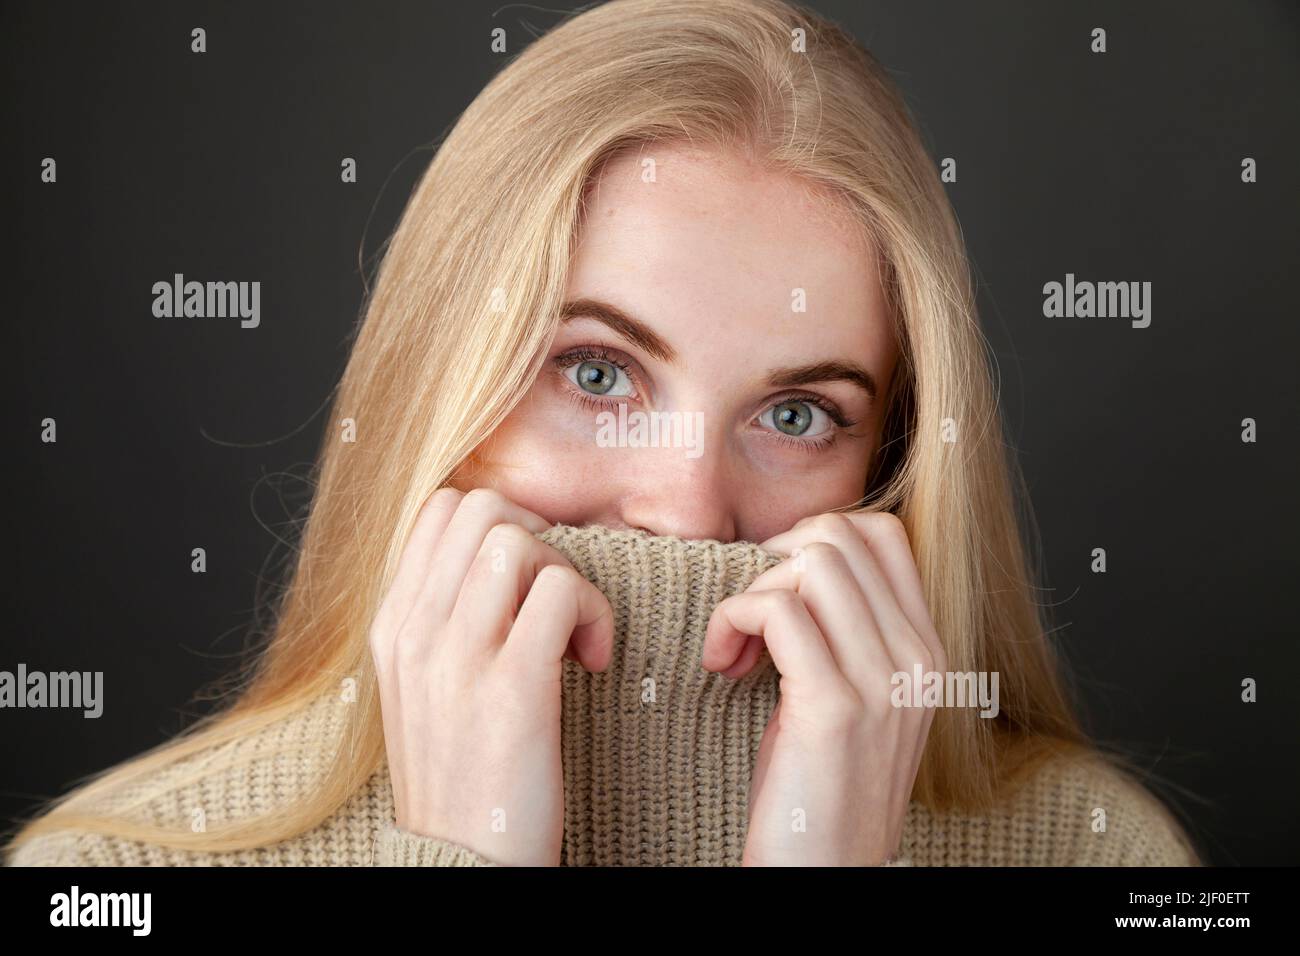 girl covering her face with sweater Stock Photo